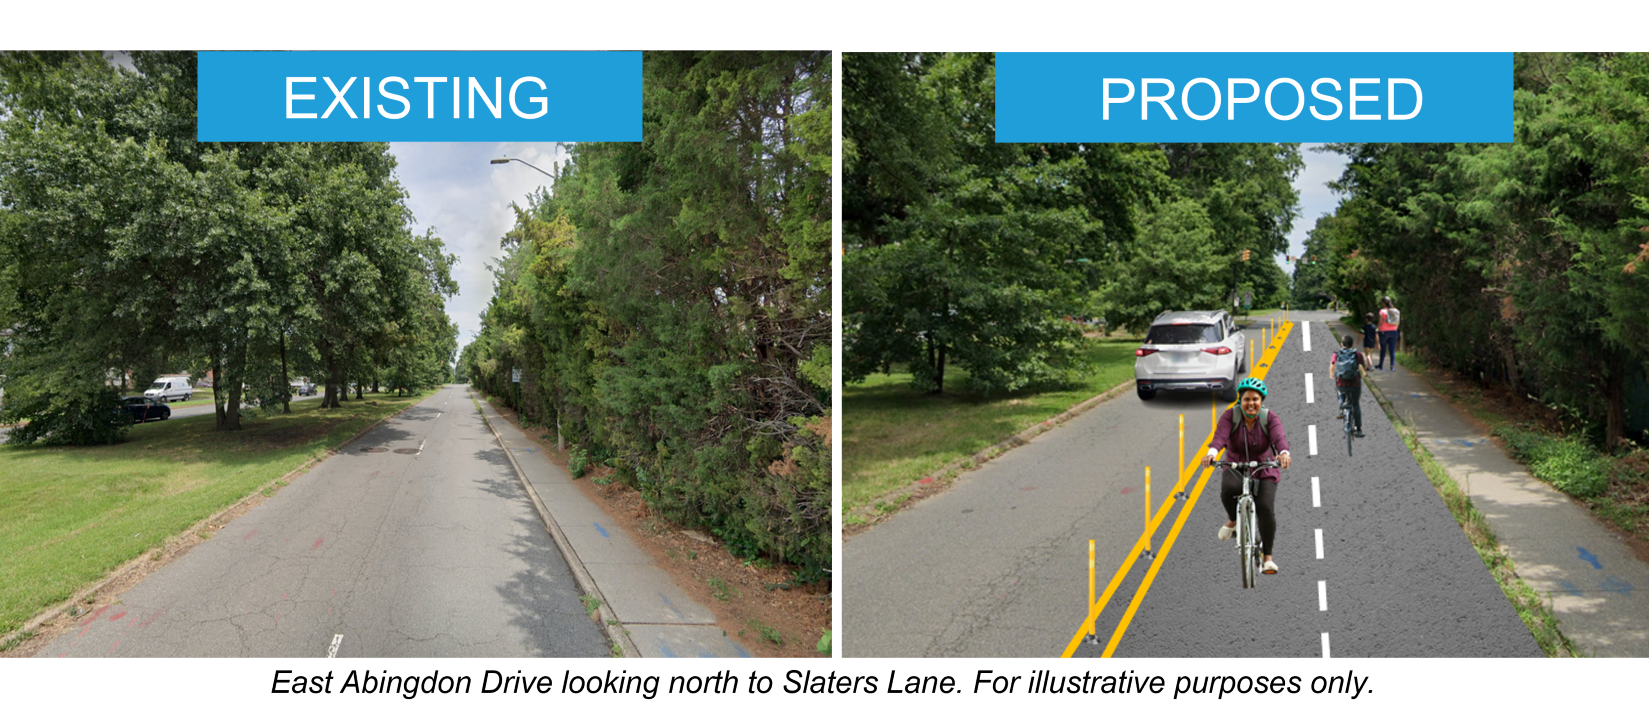 Two images, one showing the existing conditions, and one showing the proposed conditions with a two-way bike lane.